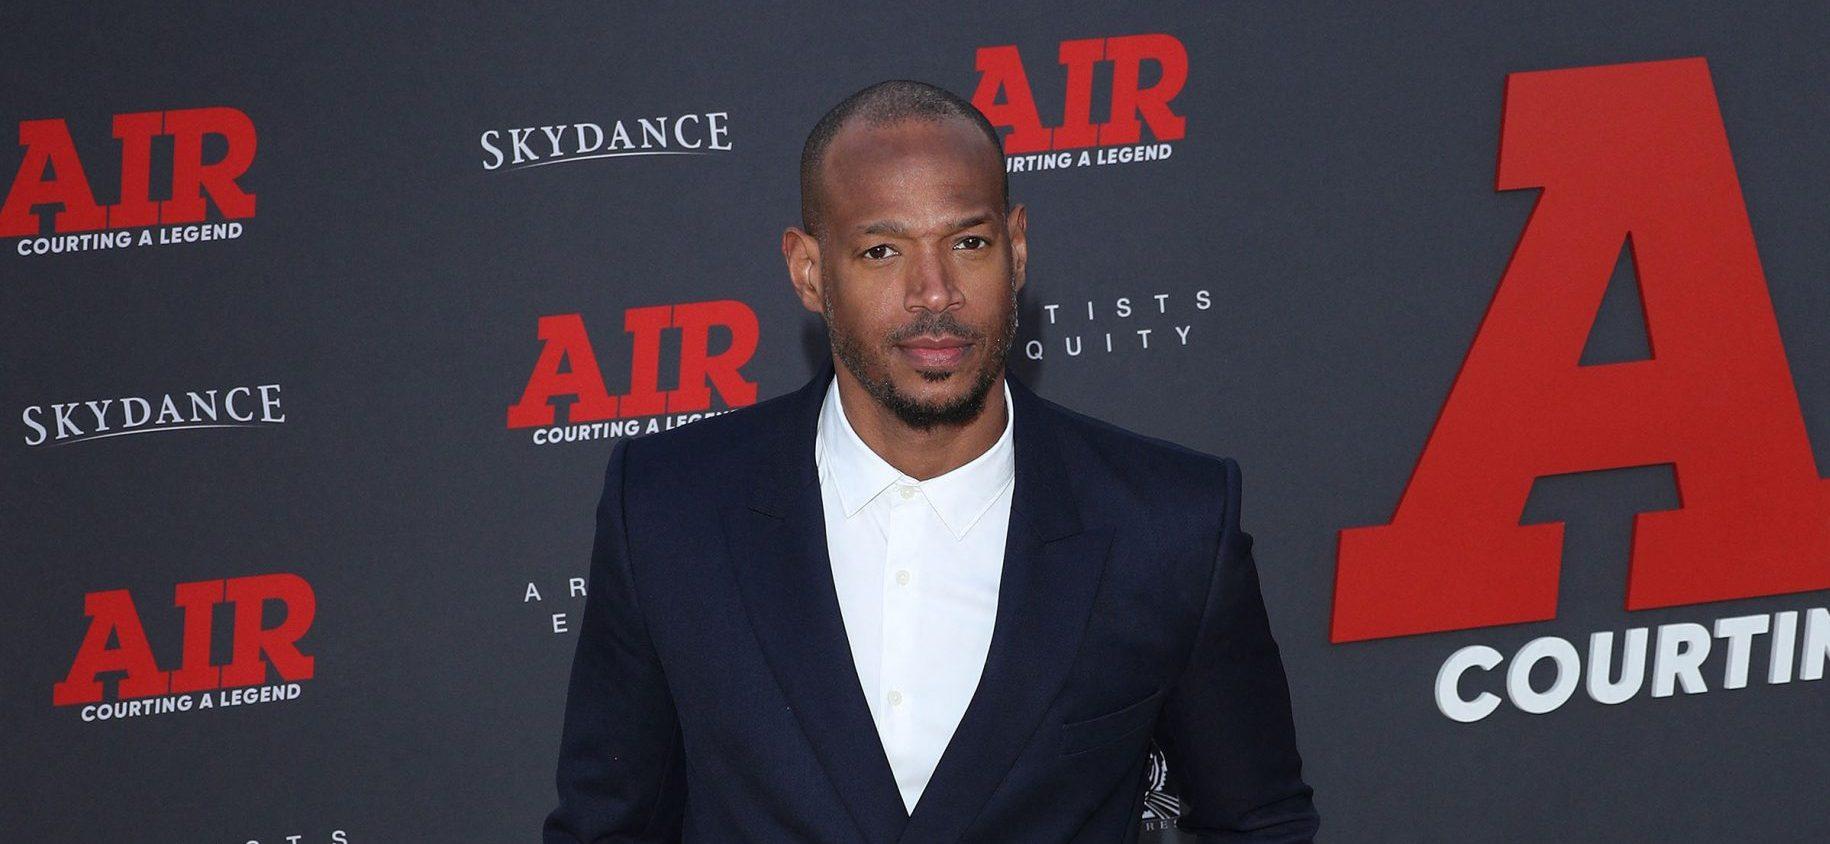 ‘Air’ Star Marlon Wayans Has HOW MANY Pairs Of Shoes?!